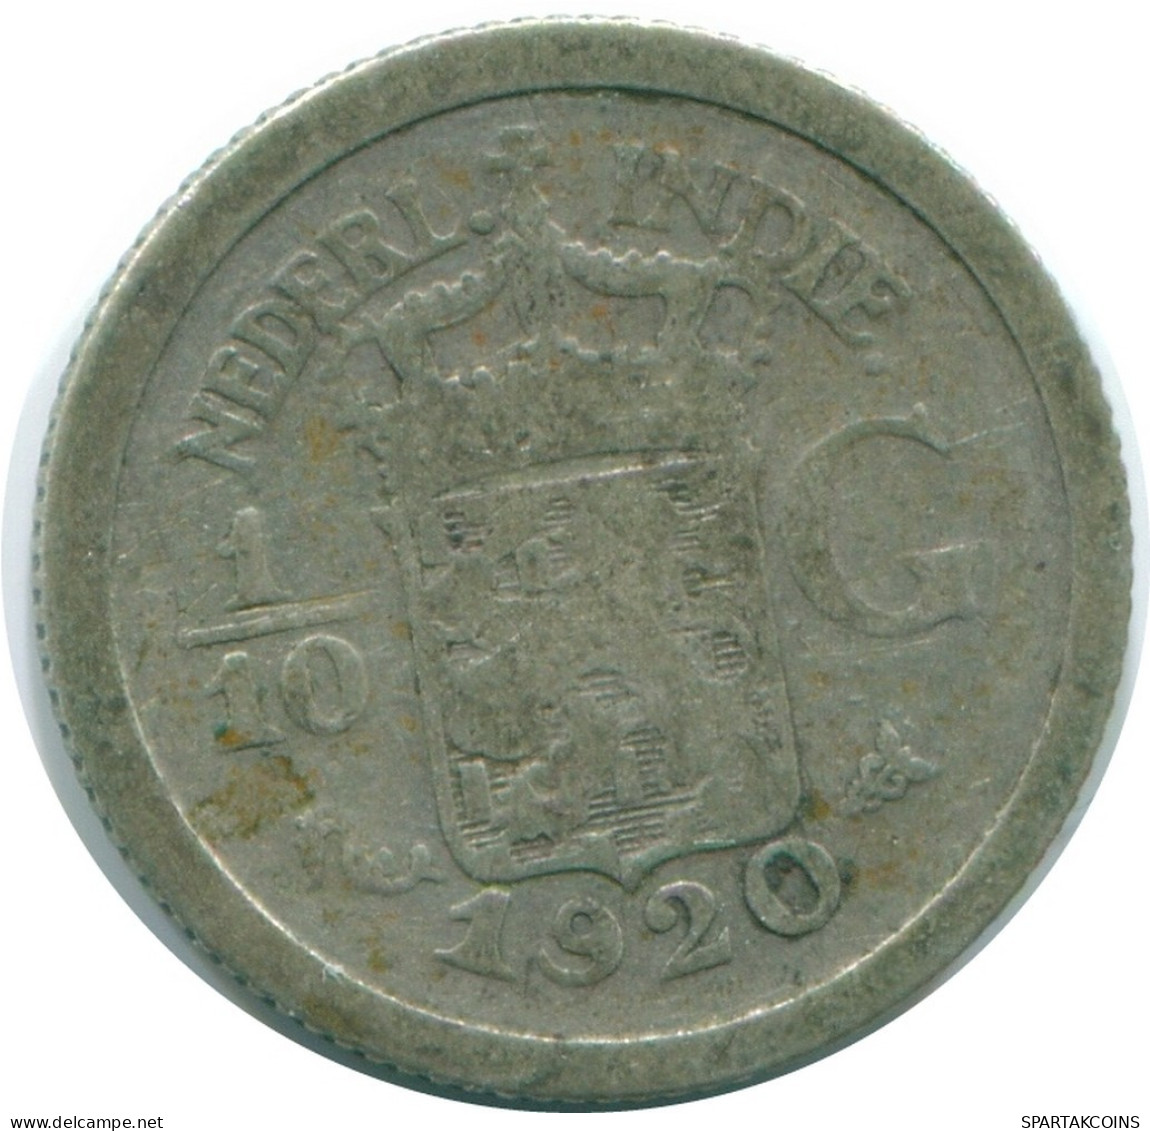 1/10 GULDEN 1920 NETHERLANDS EAST INDIES SILVER Colonial Coin #NL13355.3.U.A - Dutch East Indies